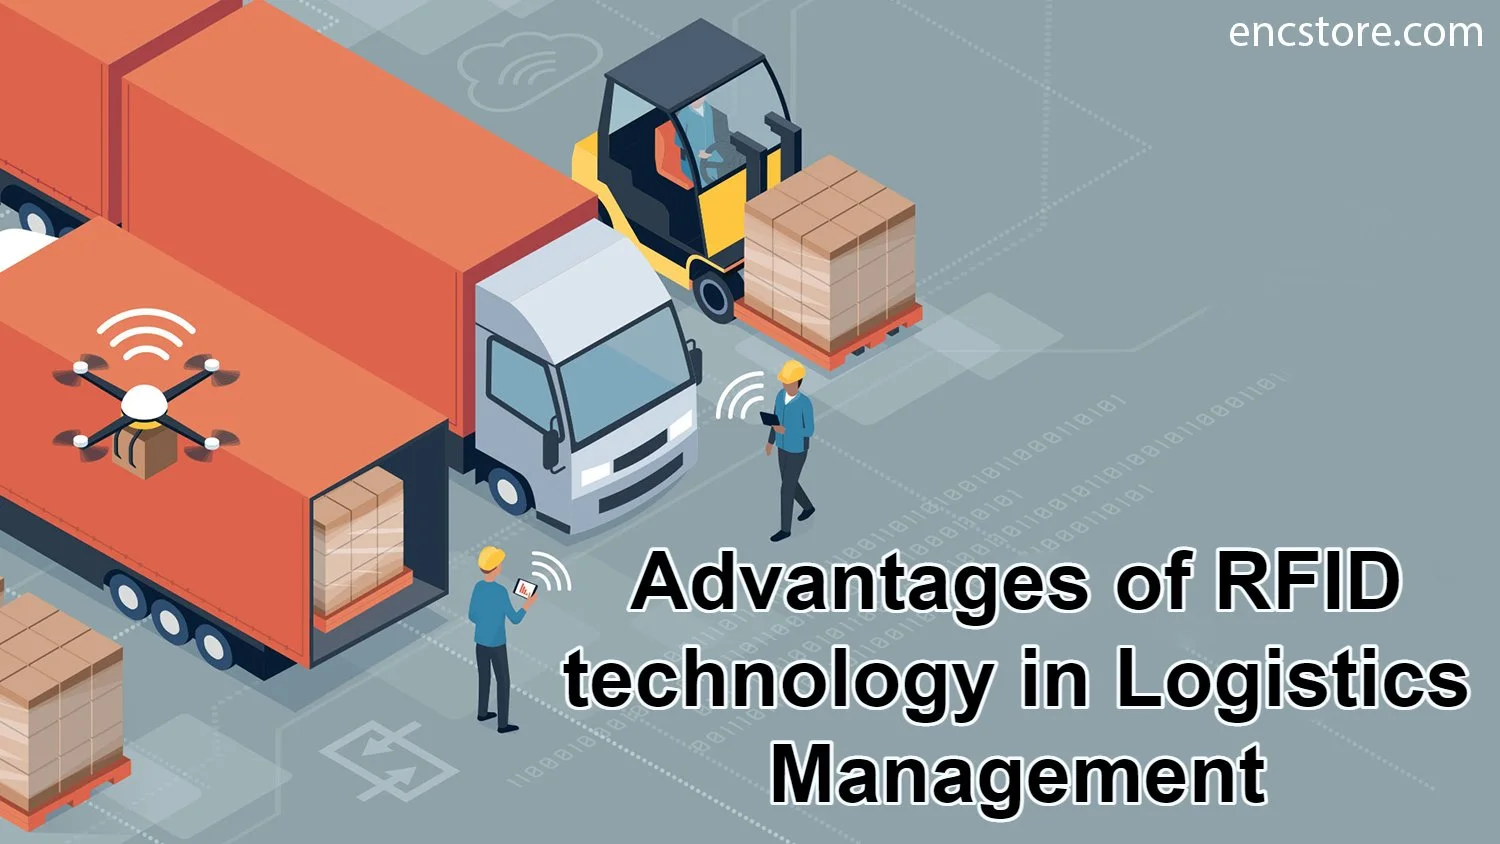 Advantages of RFID technology in Logistics Management